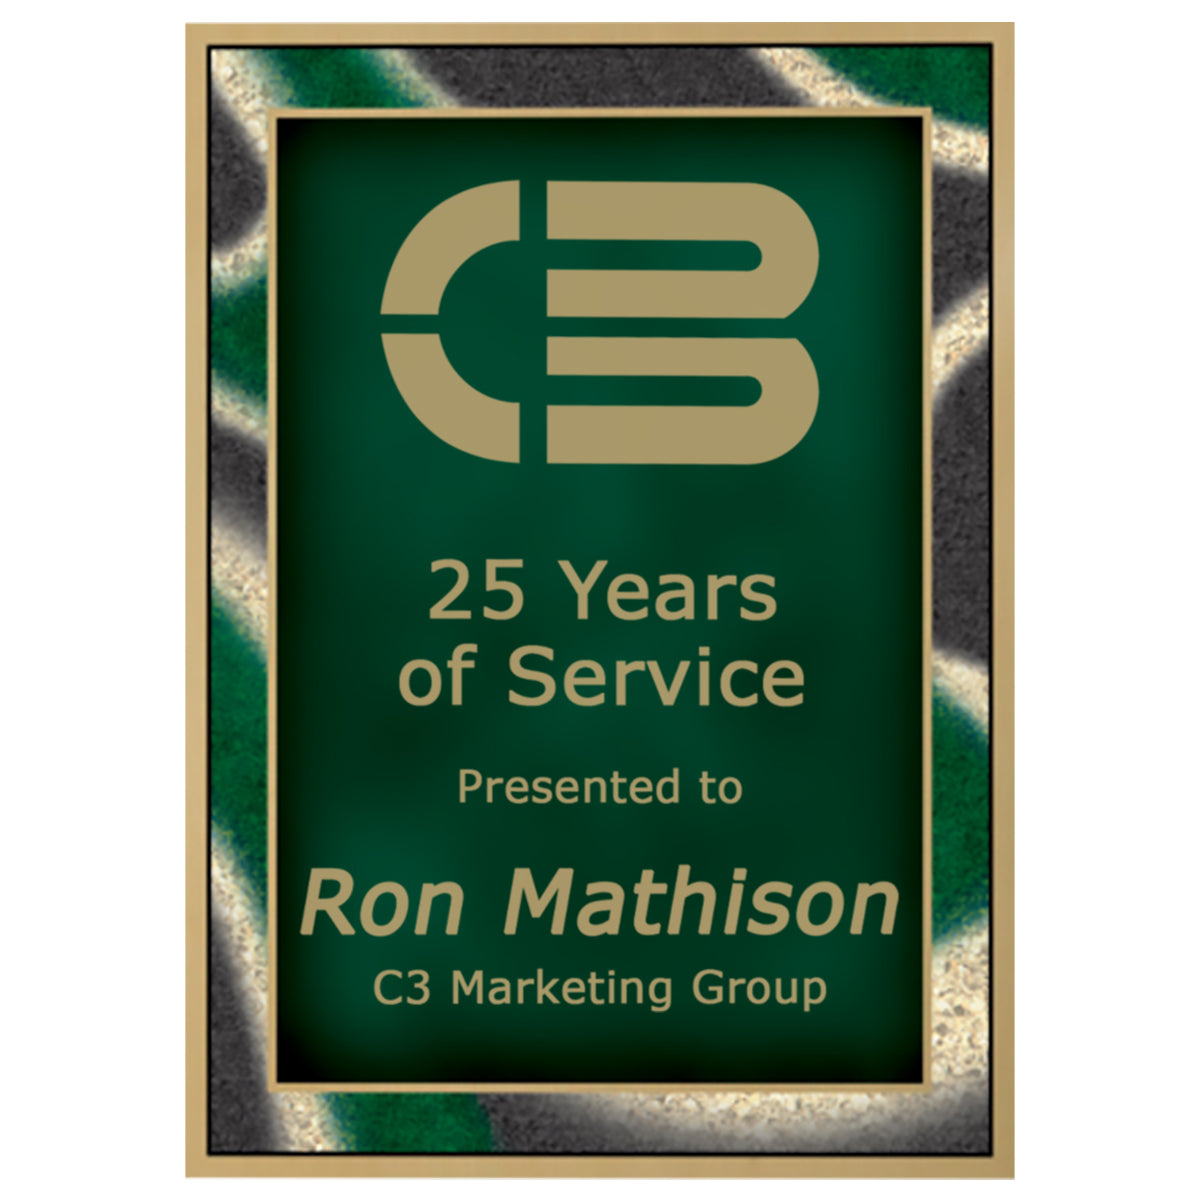 Brass Plated Steel Artist Plaque Plate, 5" x 7", Laser Engraved Plaque Plate Craftworks NW Green/Gold 